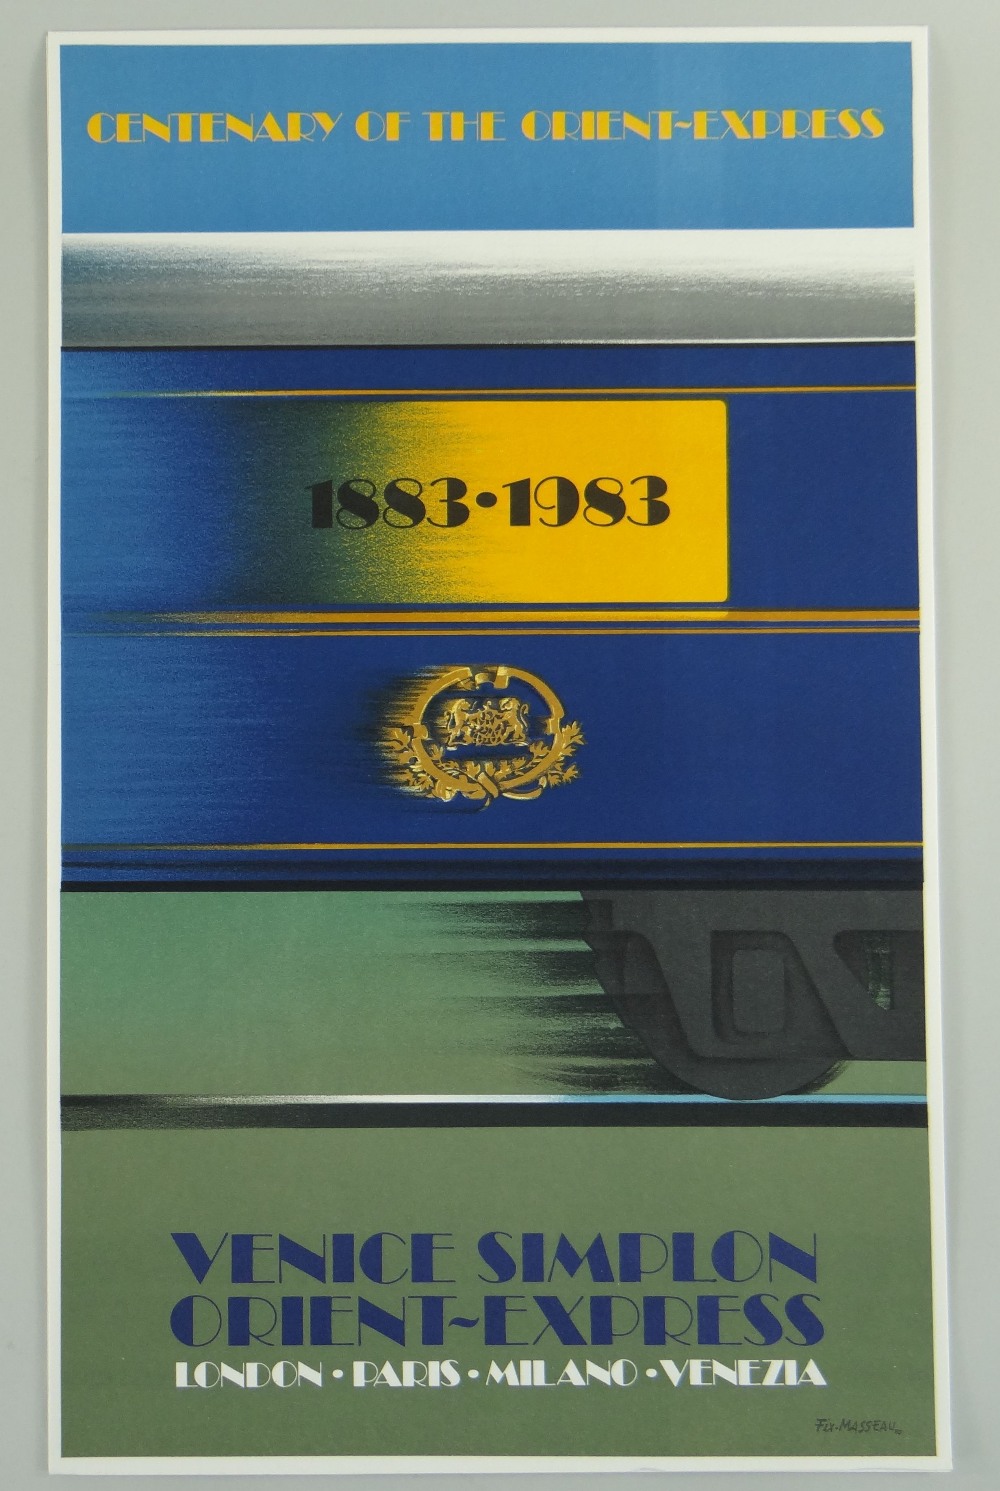 PIERRE FIX-MASSEAU boxed set of twelve limited edition (70/200) coloured lithographs - Venice - Image 12 of 20